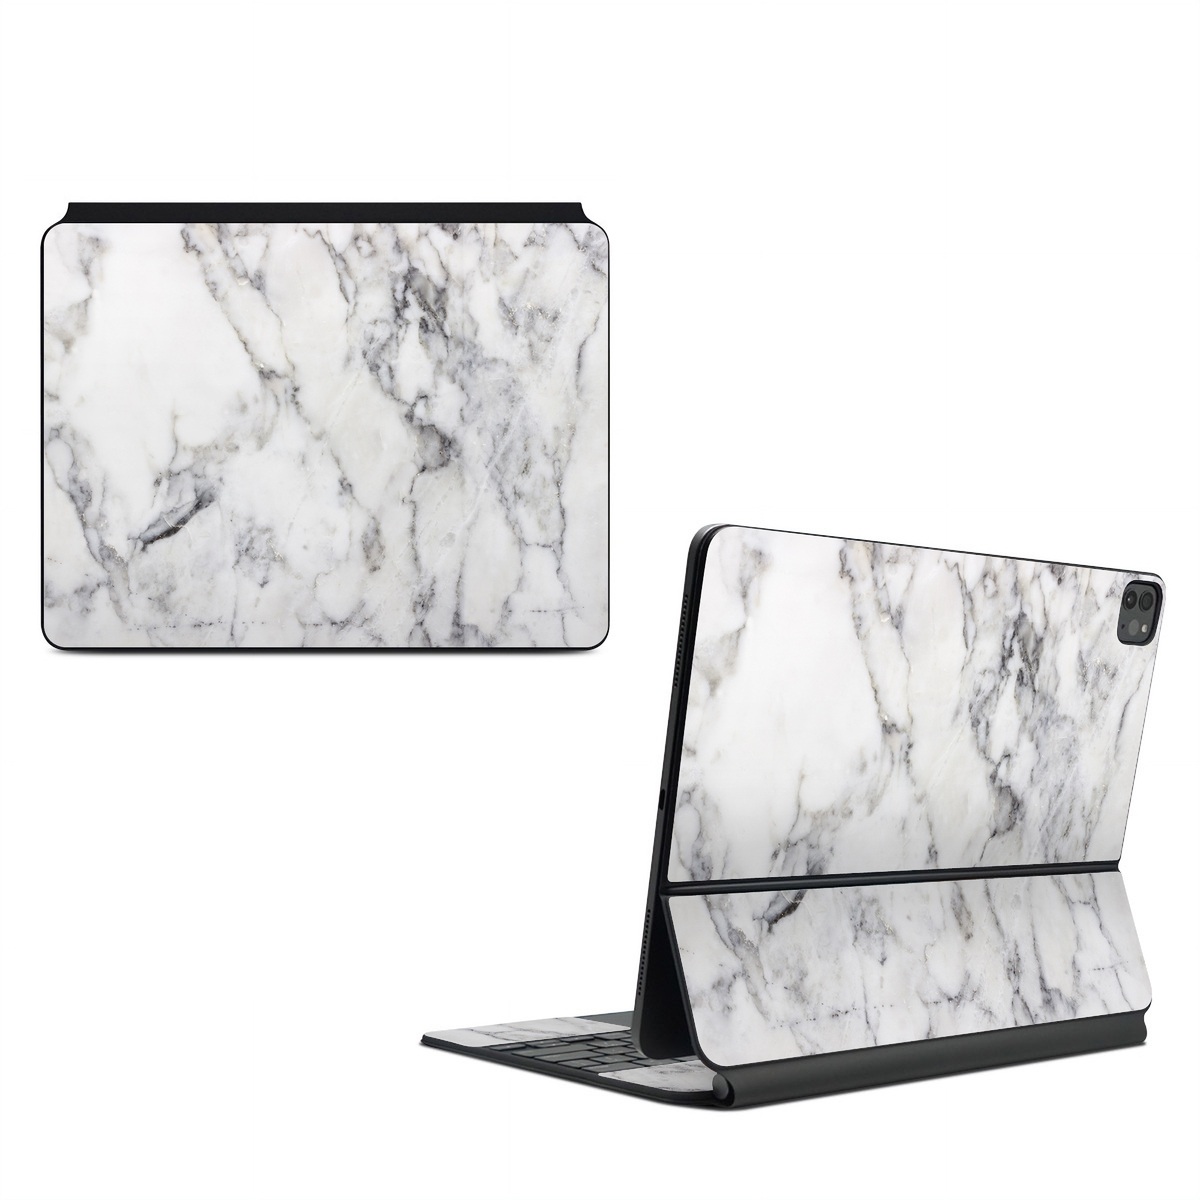 Magic Keyboard for iPad Series Skin design of White, Geological phenomenon, Marble, Black-and-white, Freezing, with white, black, gray colors